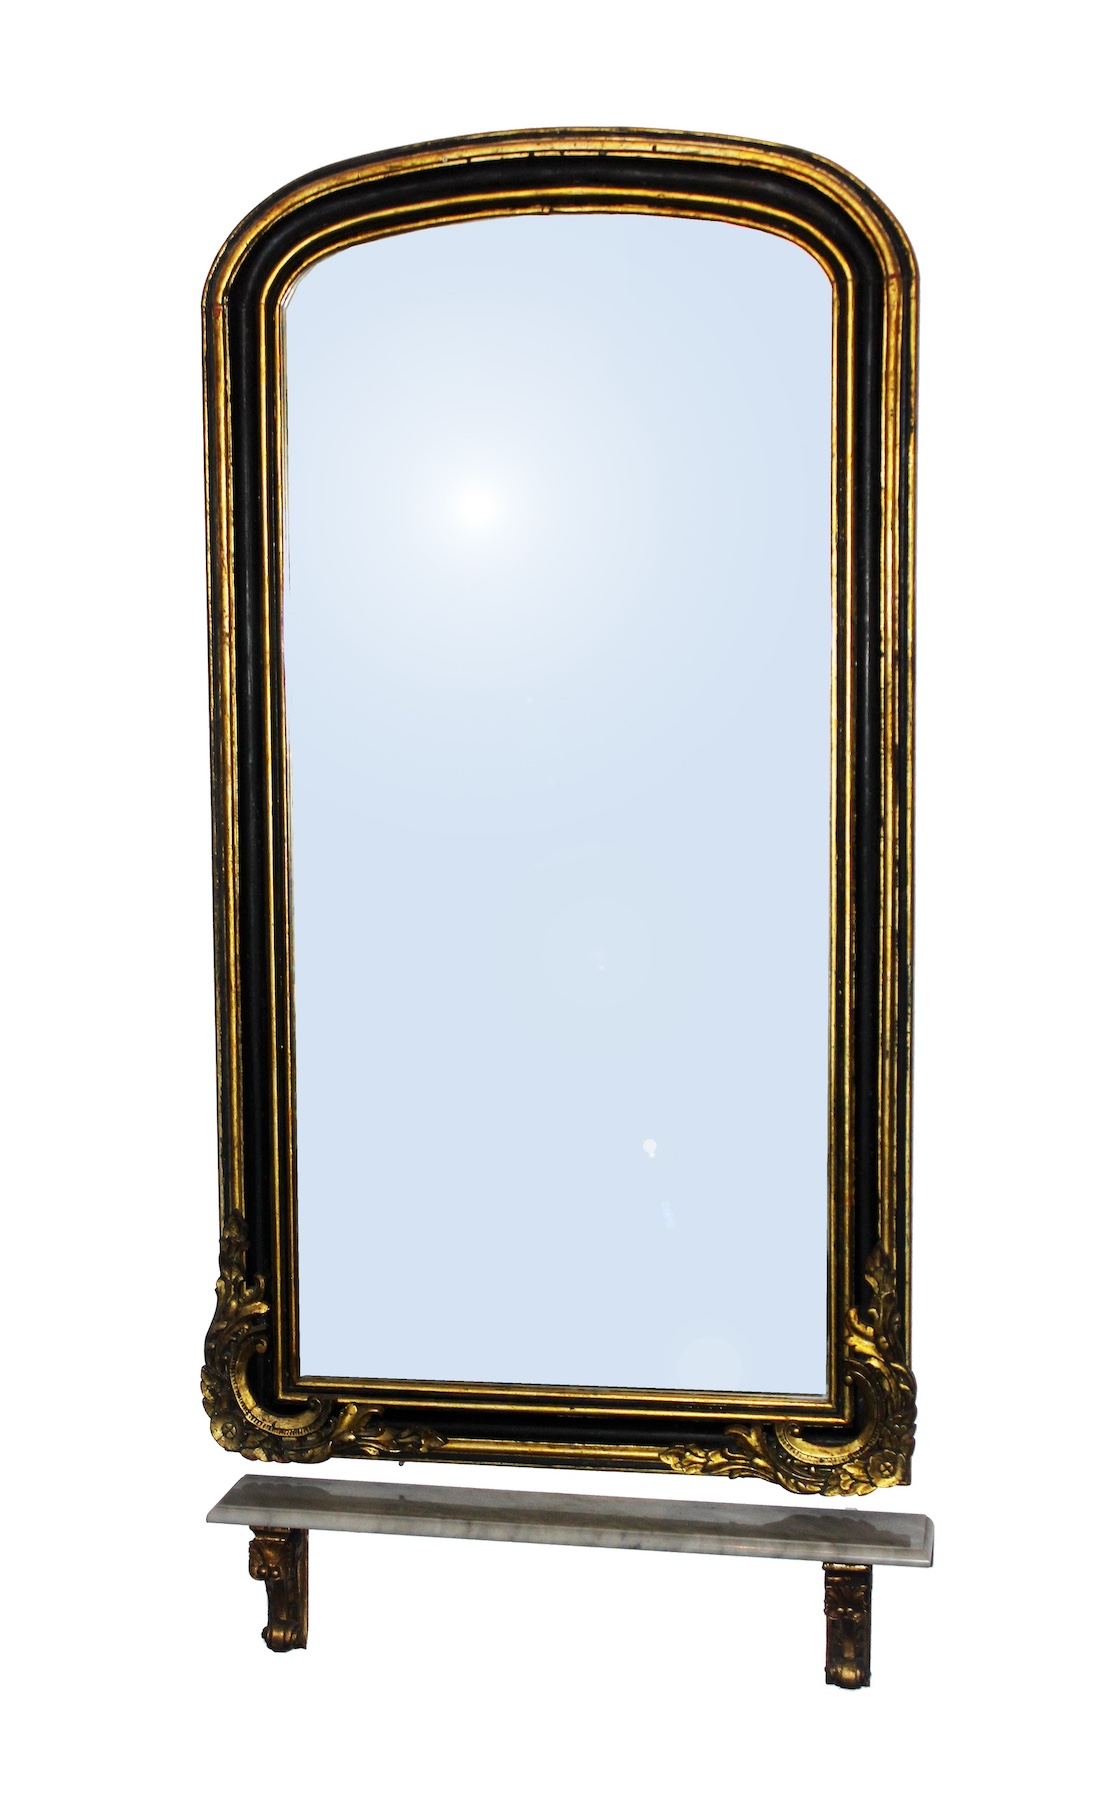 A 20th century gilt decorated wall mirror and stand